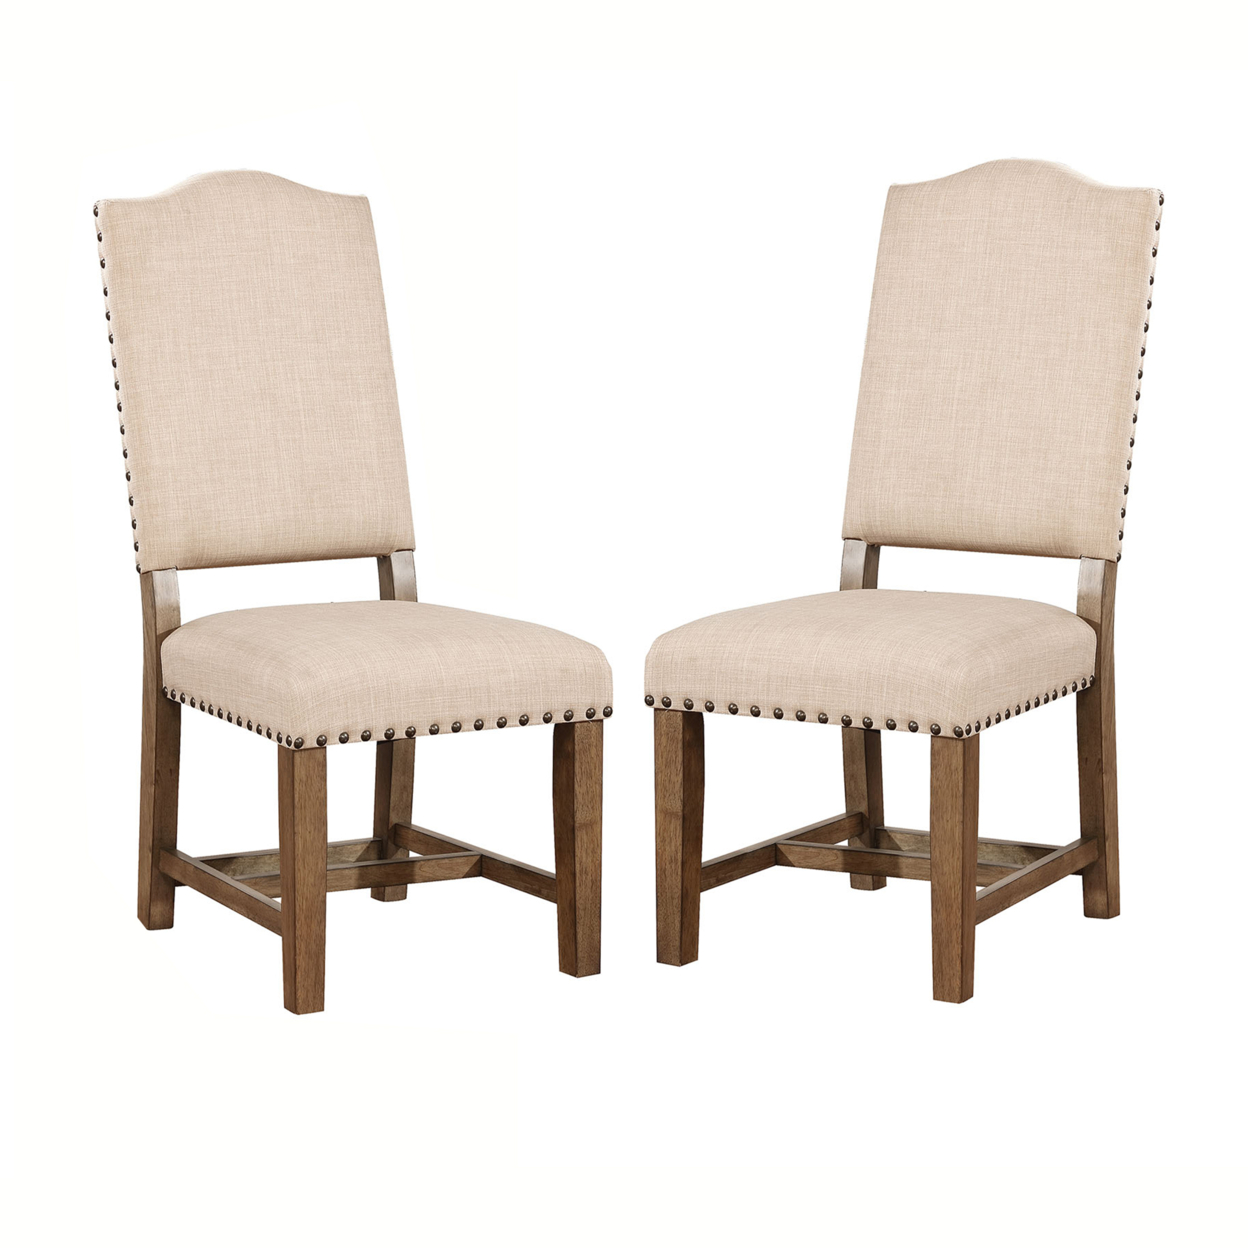 Fabric Upholstered Solid Wood Side Chair, Pack Of Two, Beige And Brown- Saltoro Sherpi